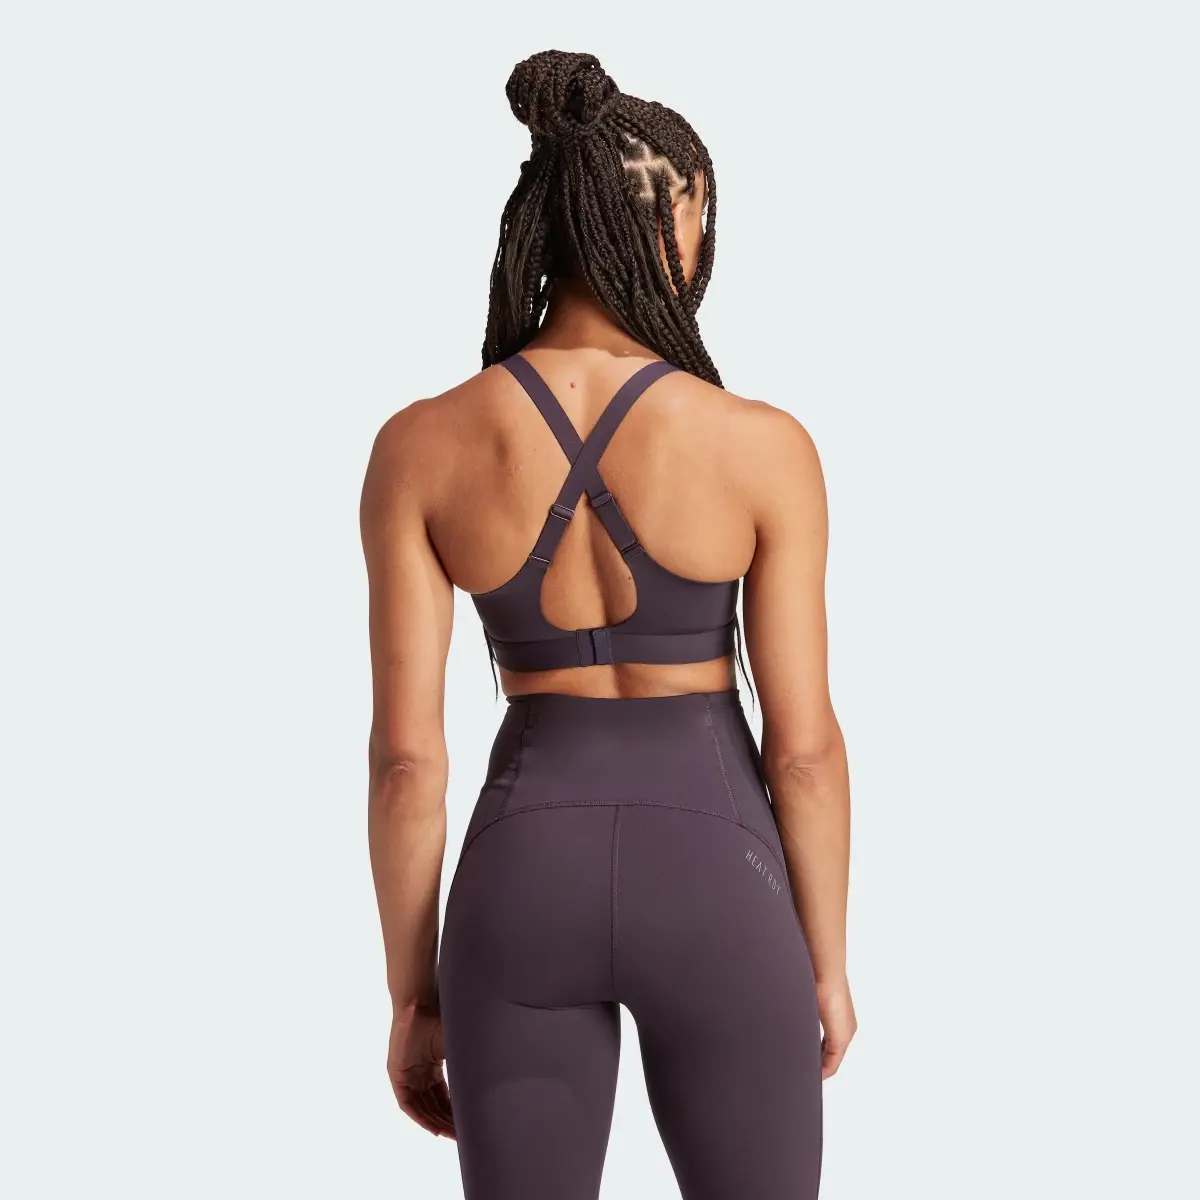 Adidas Brassière de training TLRD Impact Luxe Maintien fort. 3